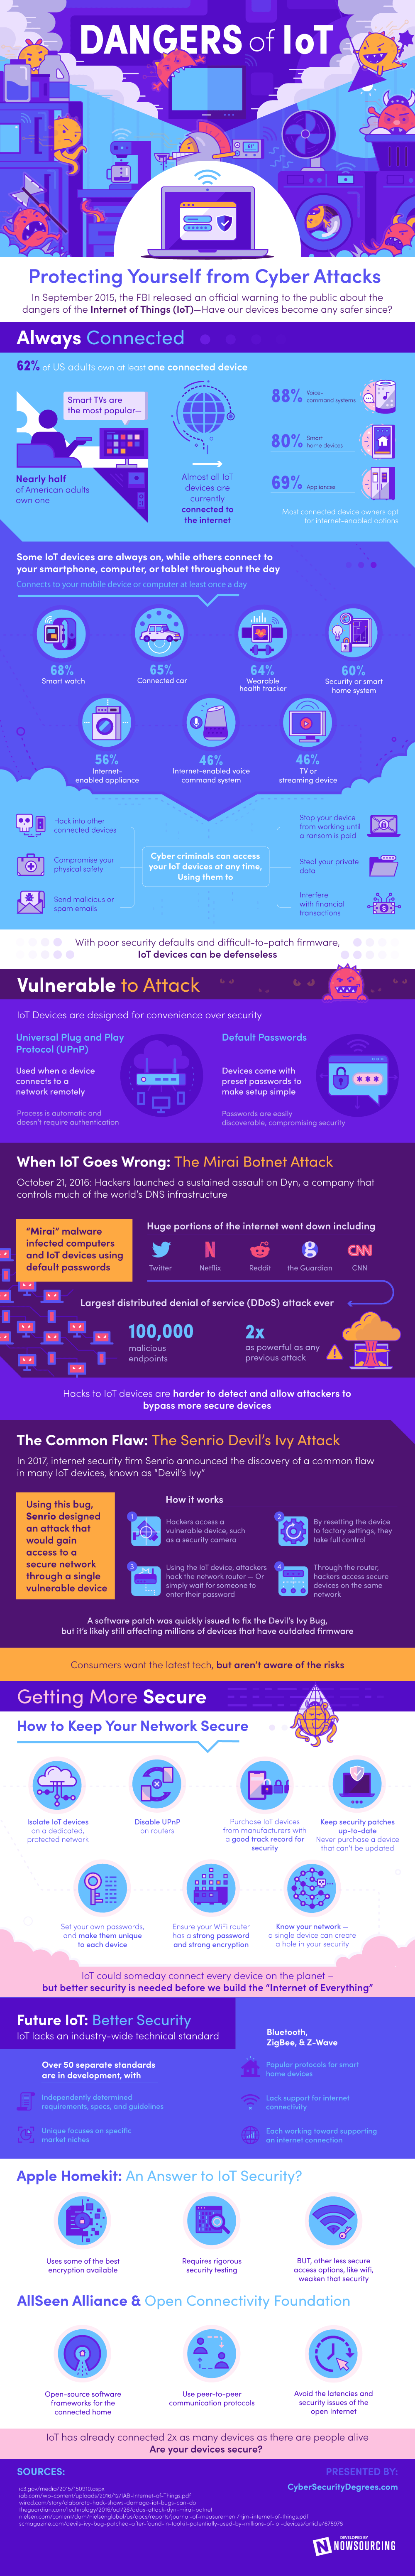 The Dangers of the Internet of Things [infographic]